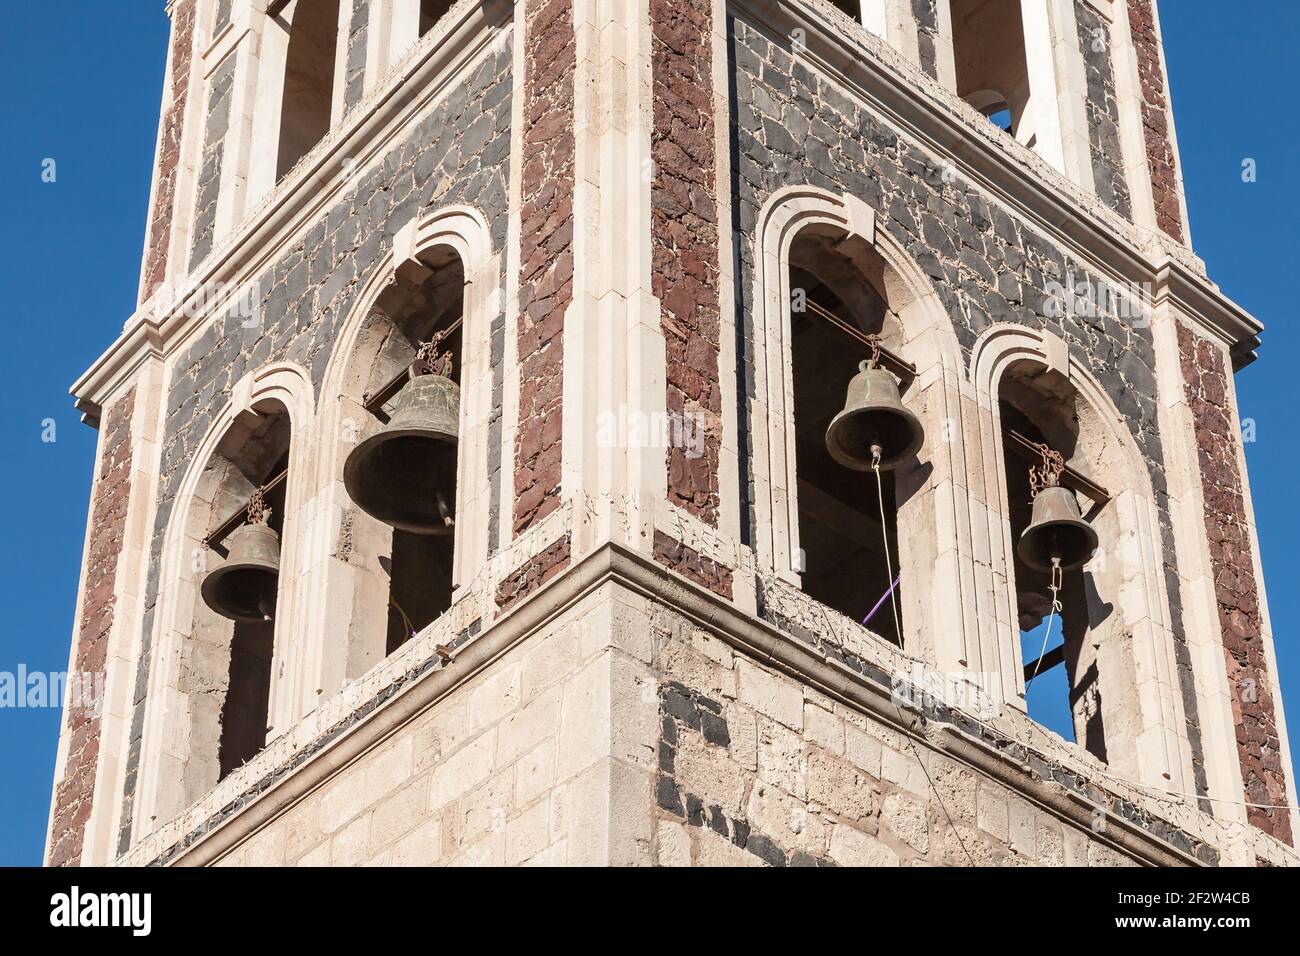 Bells in the tower of Loreto Mission Church, Baja California Sur, Mexico Stock Photo